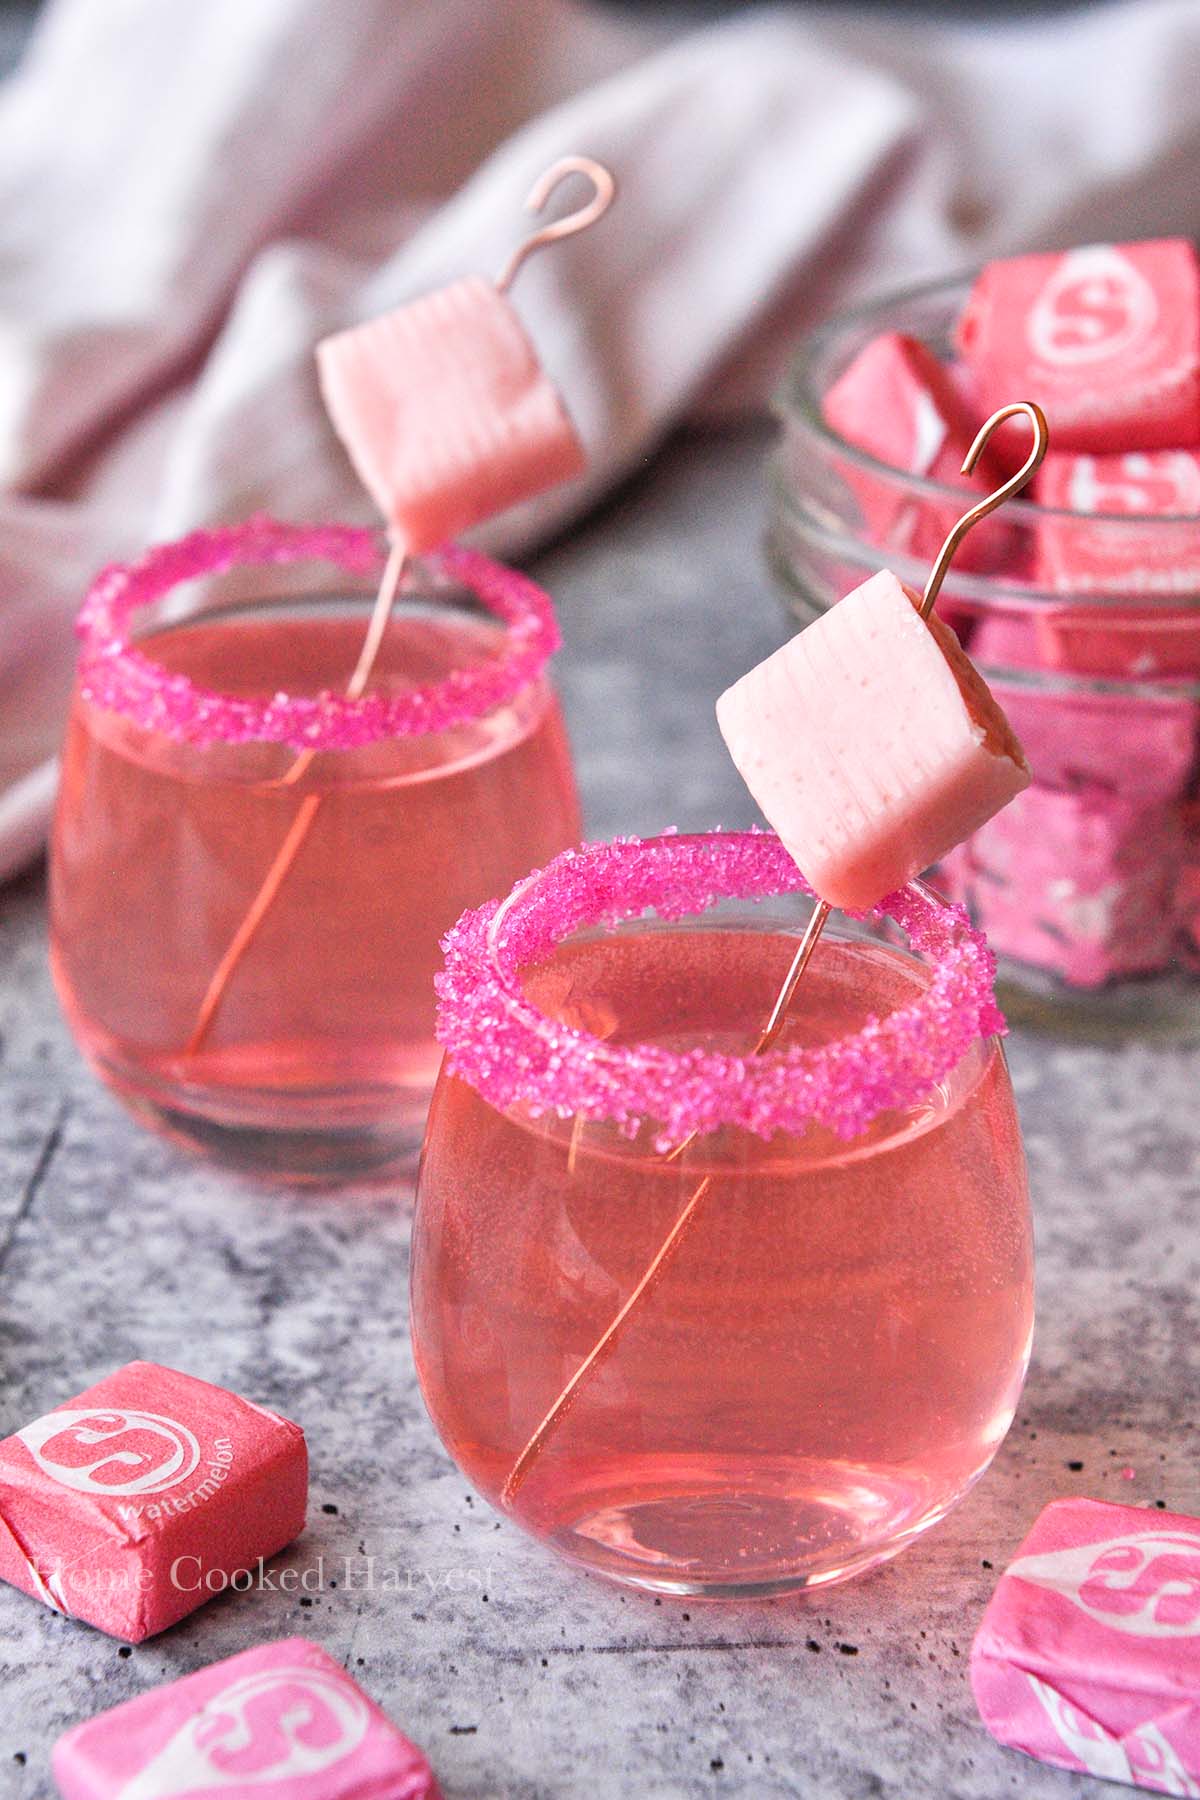 Two starburst shots with a small jar of starbursts.